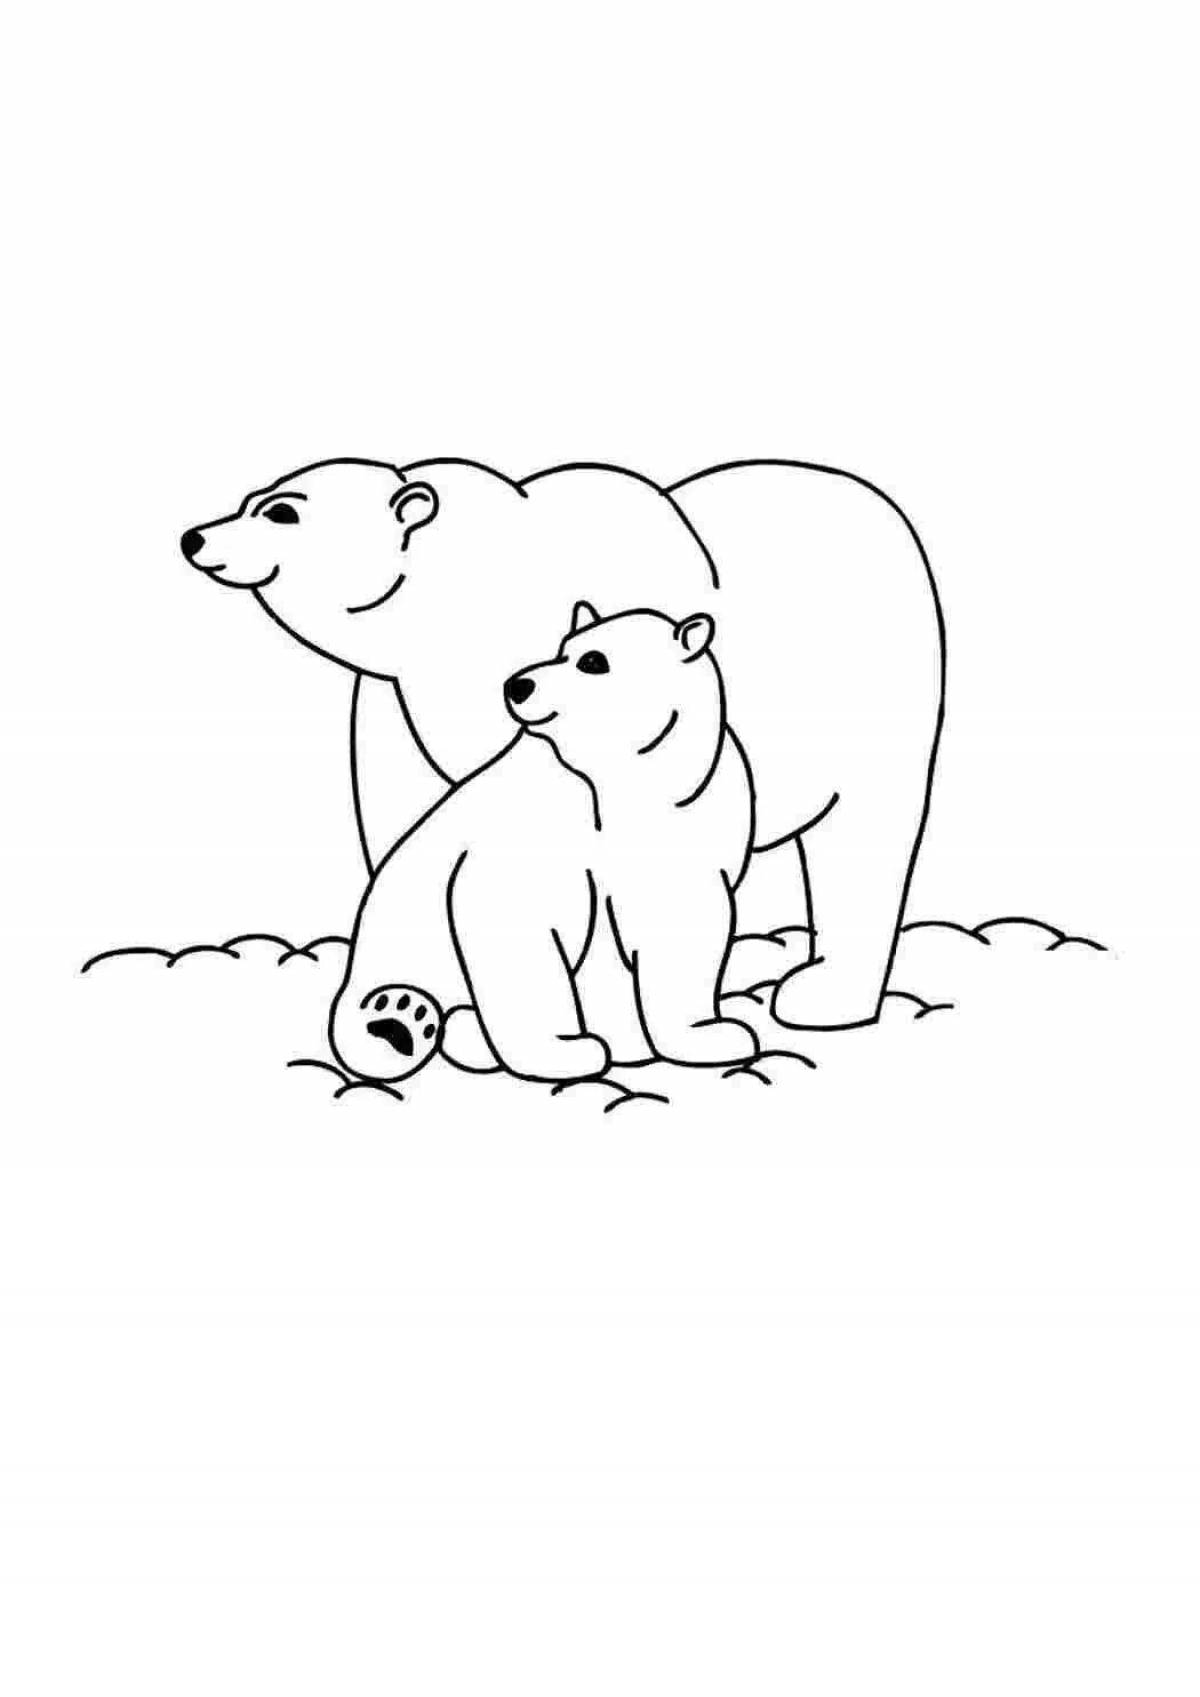 Crazy mind and bear coloring page